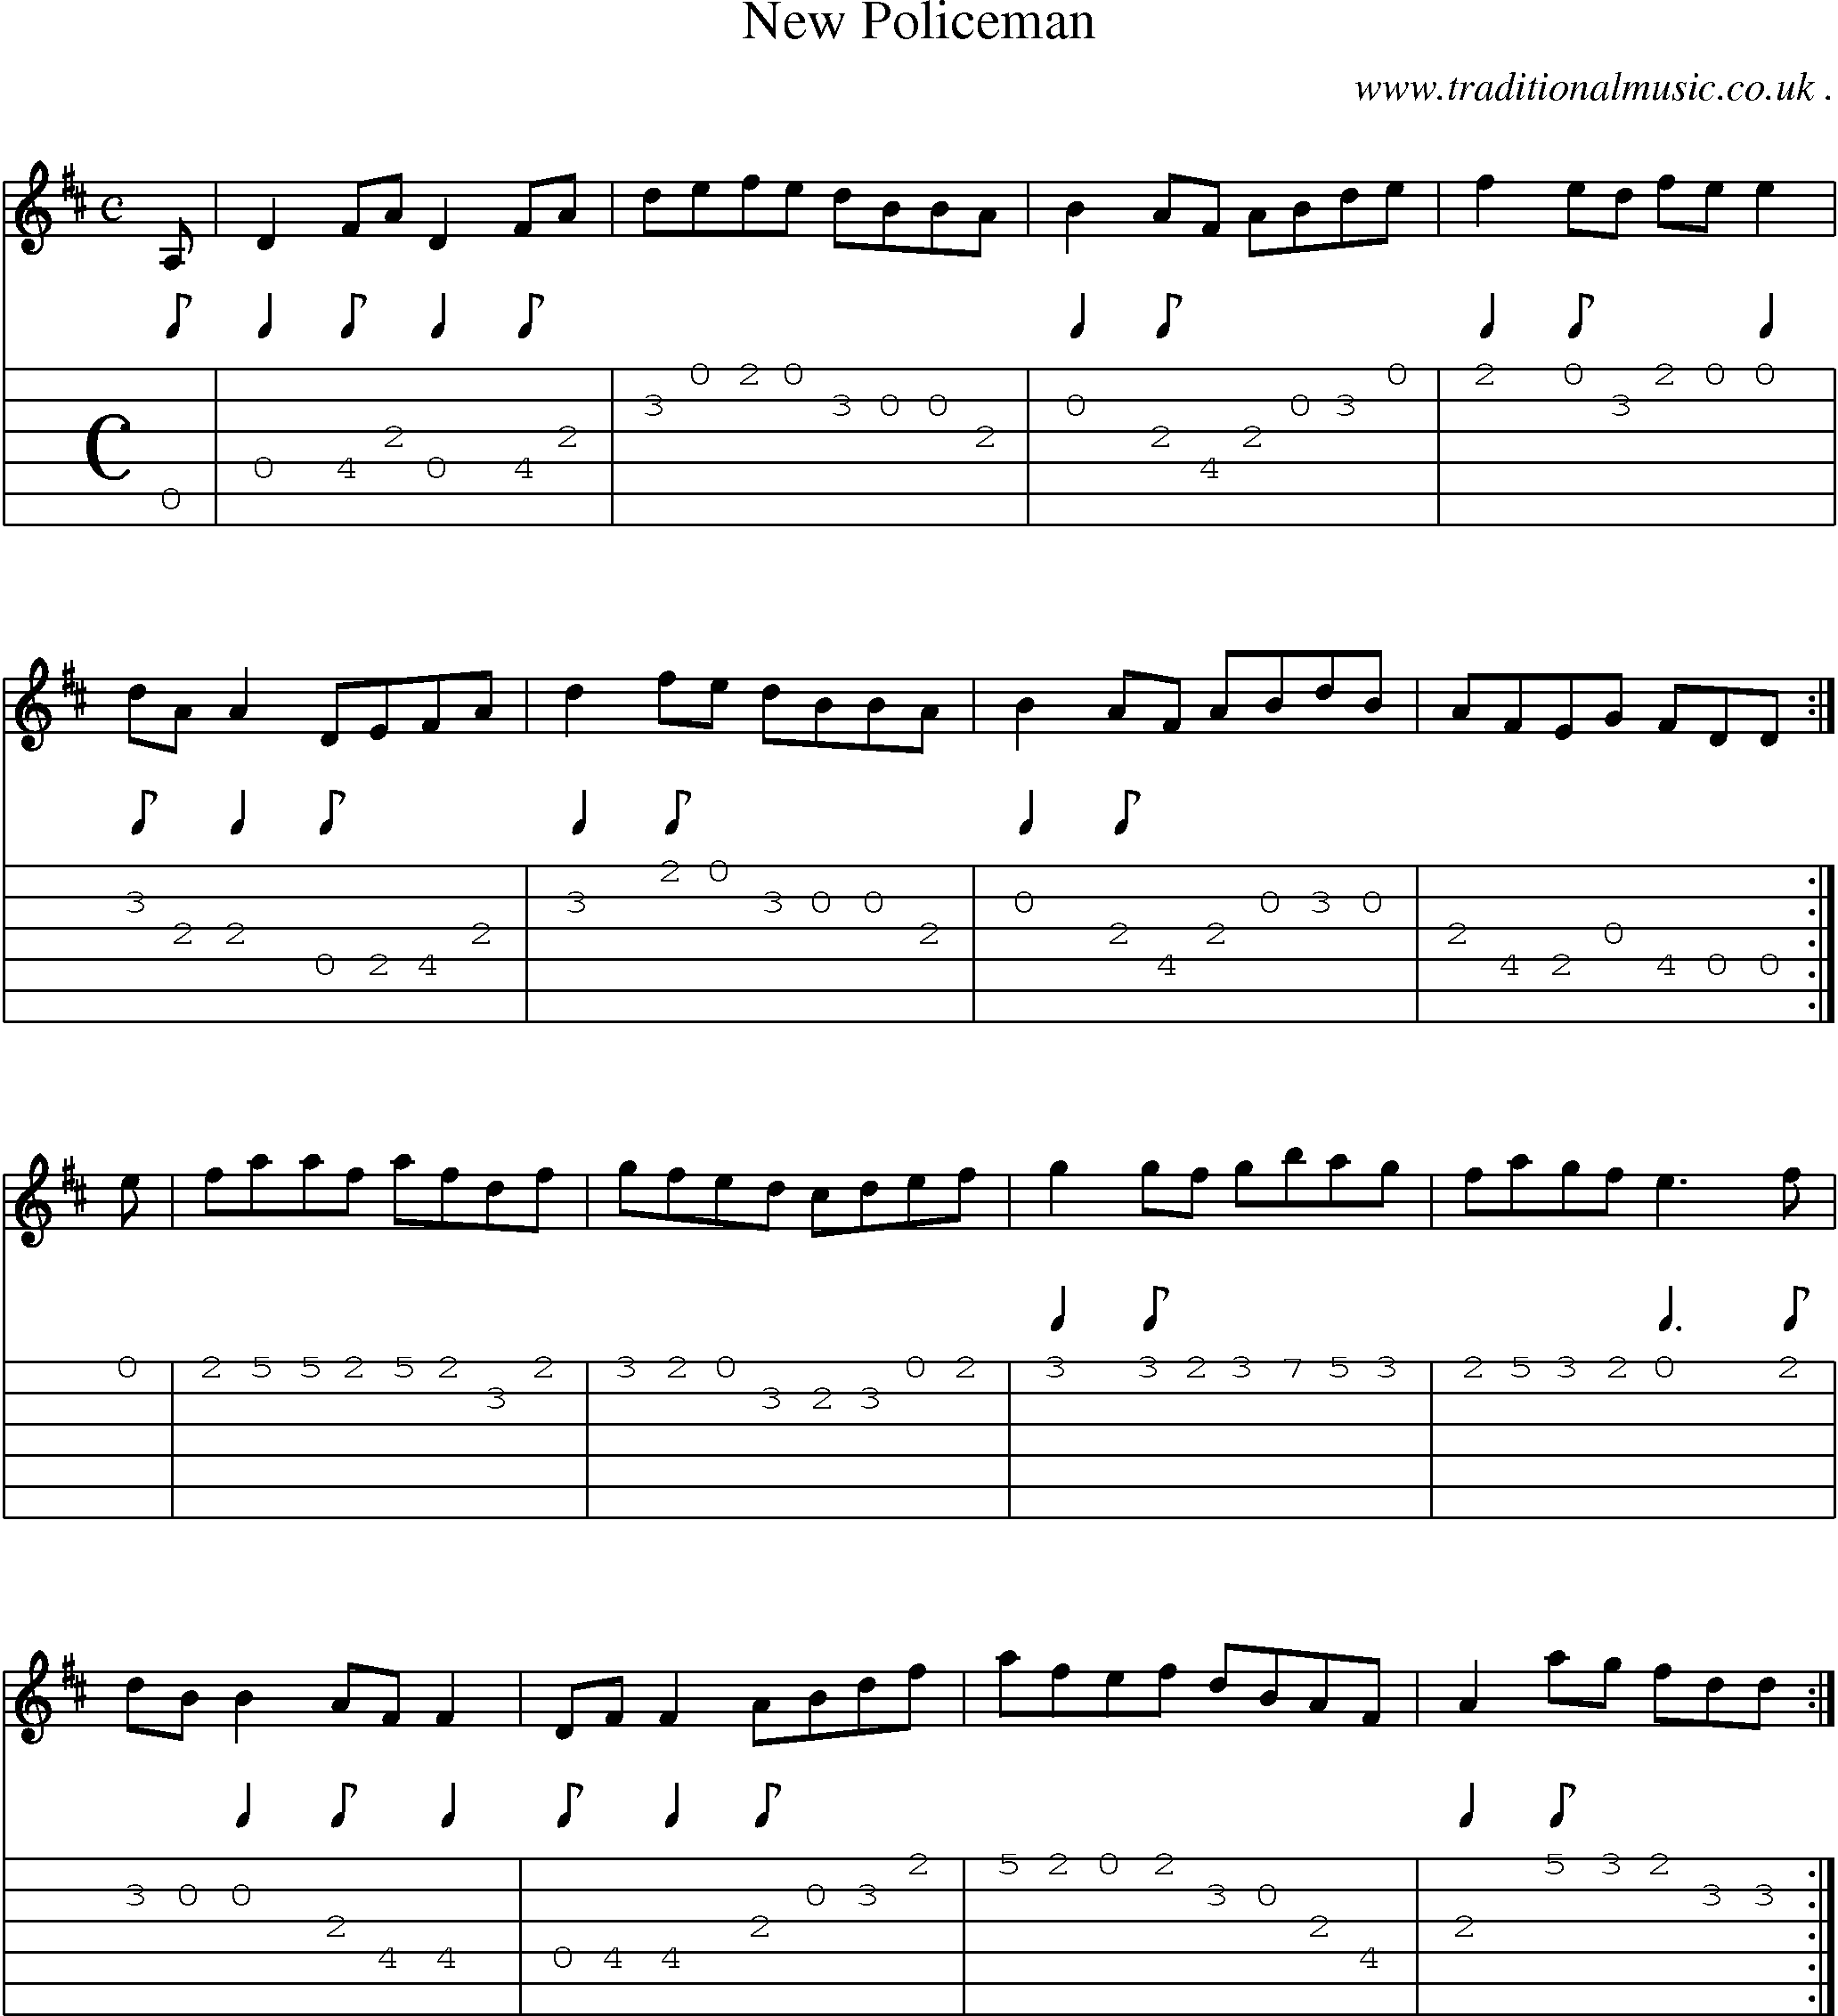 Sheet-Music and Guitar Tabs for New Policeman